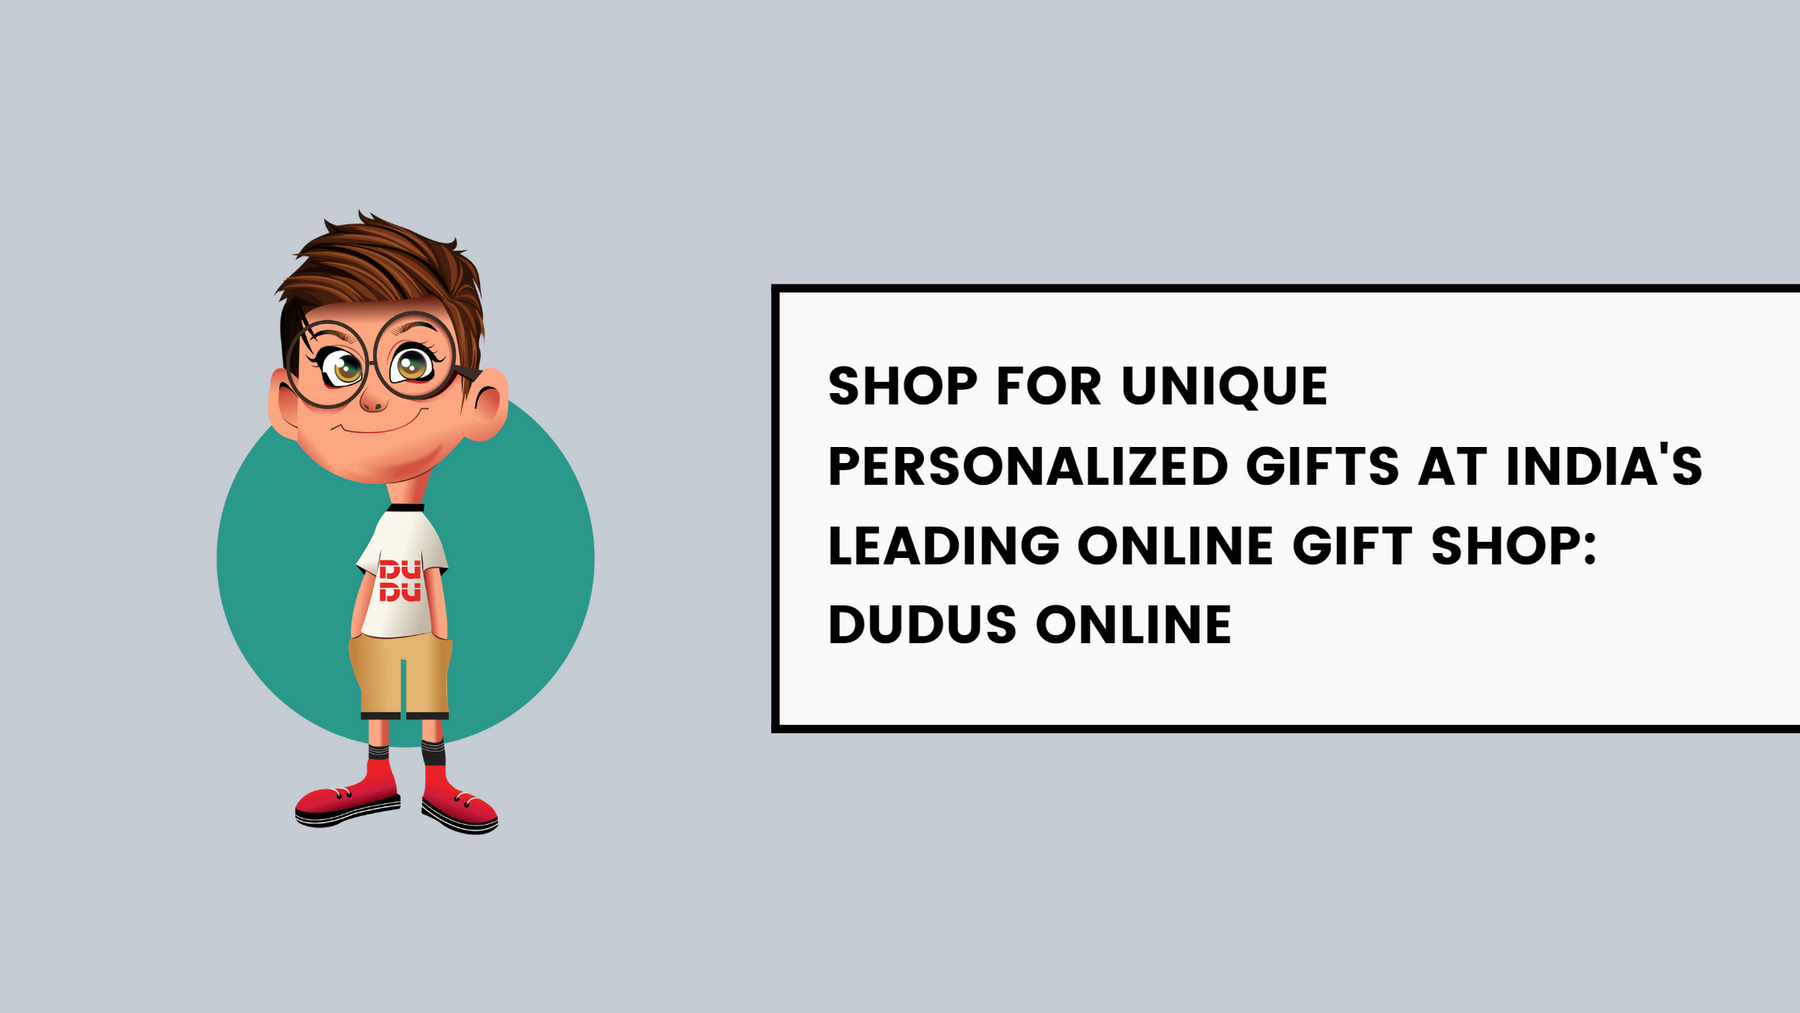 Shop For Unique Personalized Gifts At India's Leading Online Gift Shop: Dudus Online